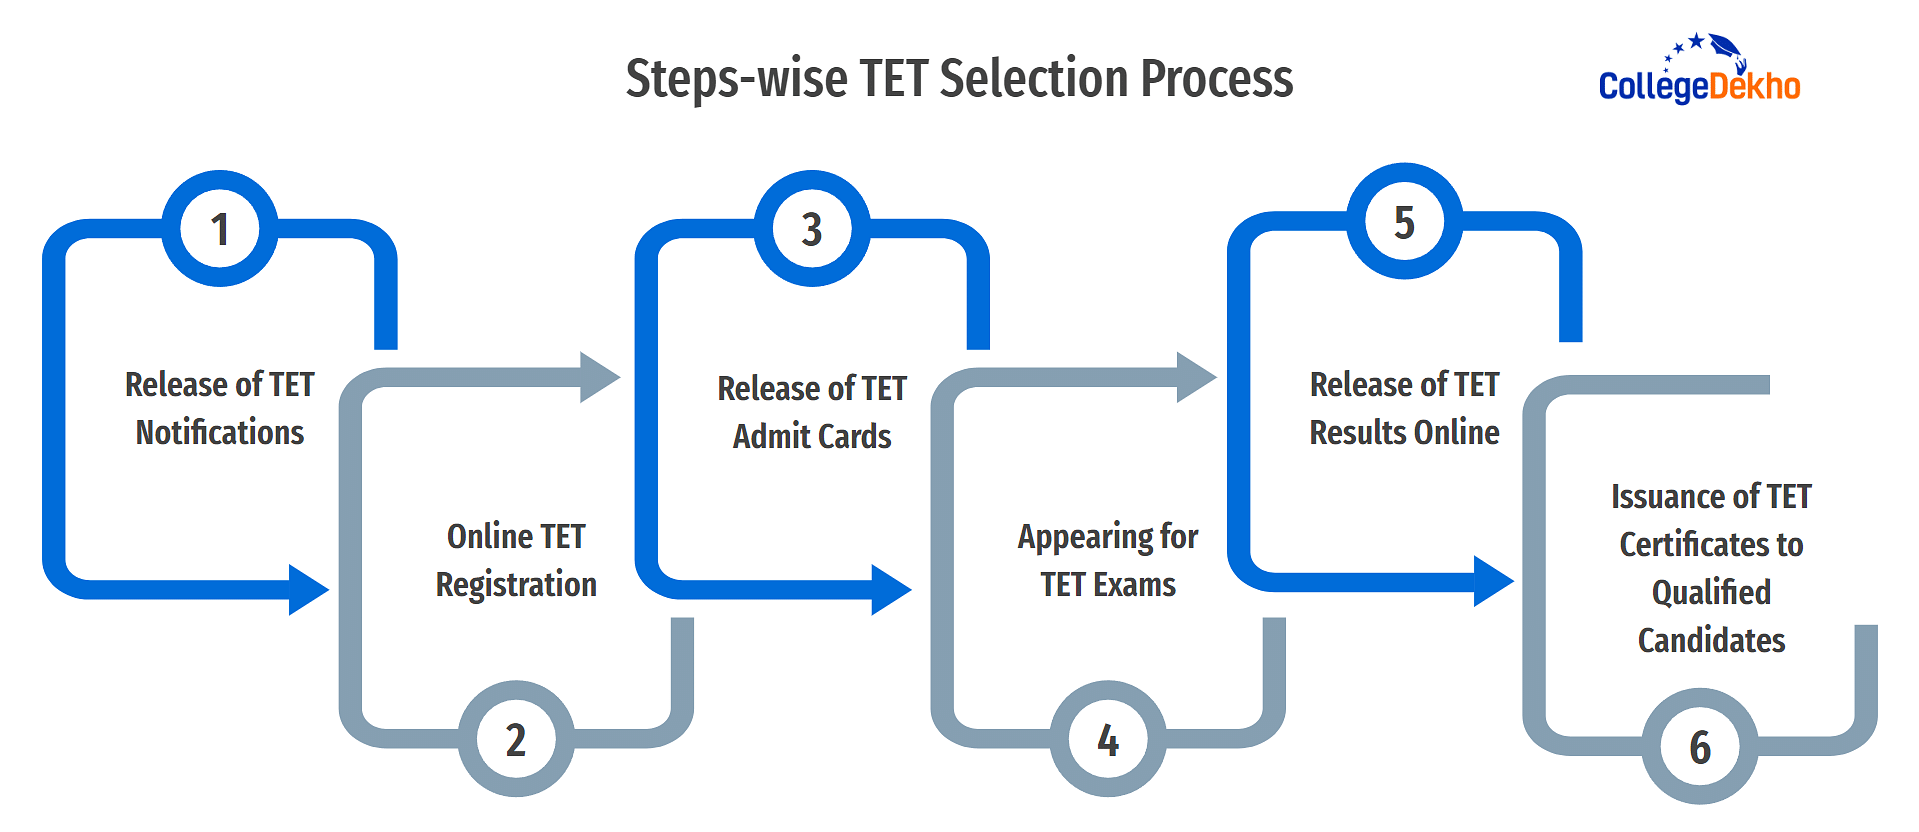 Steps-wise TET Selection Process